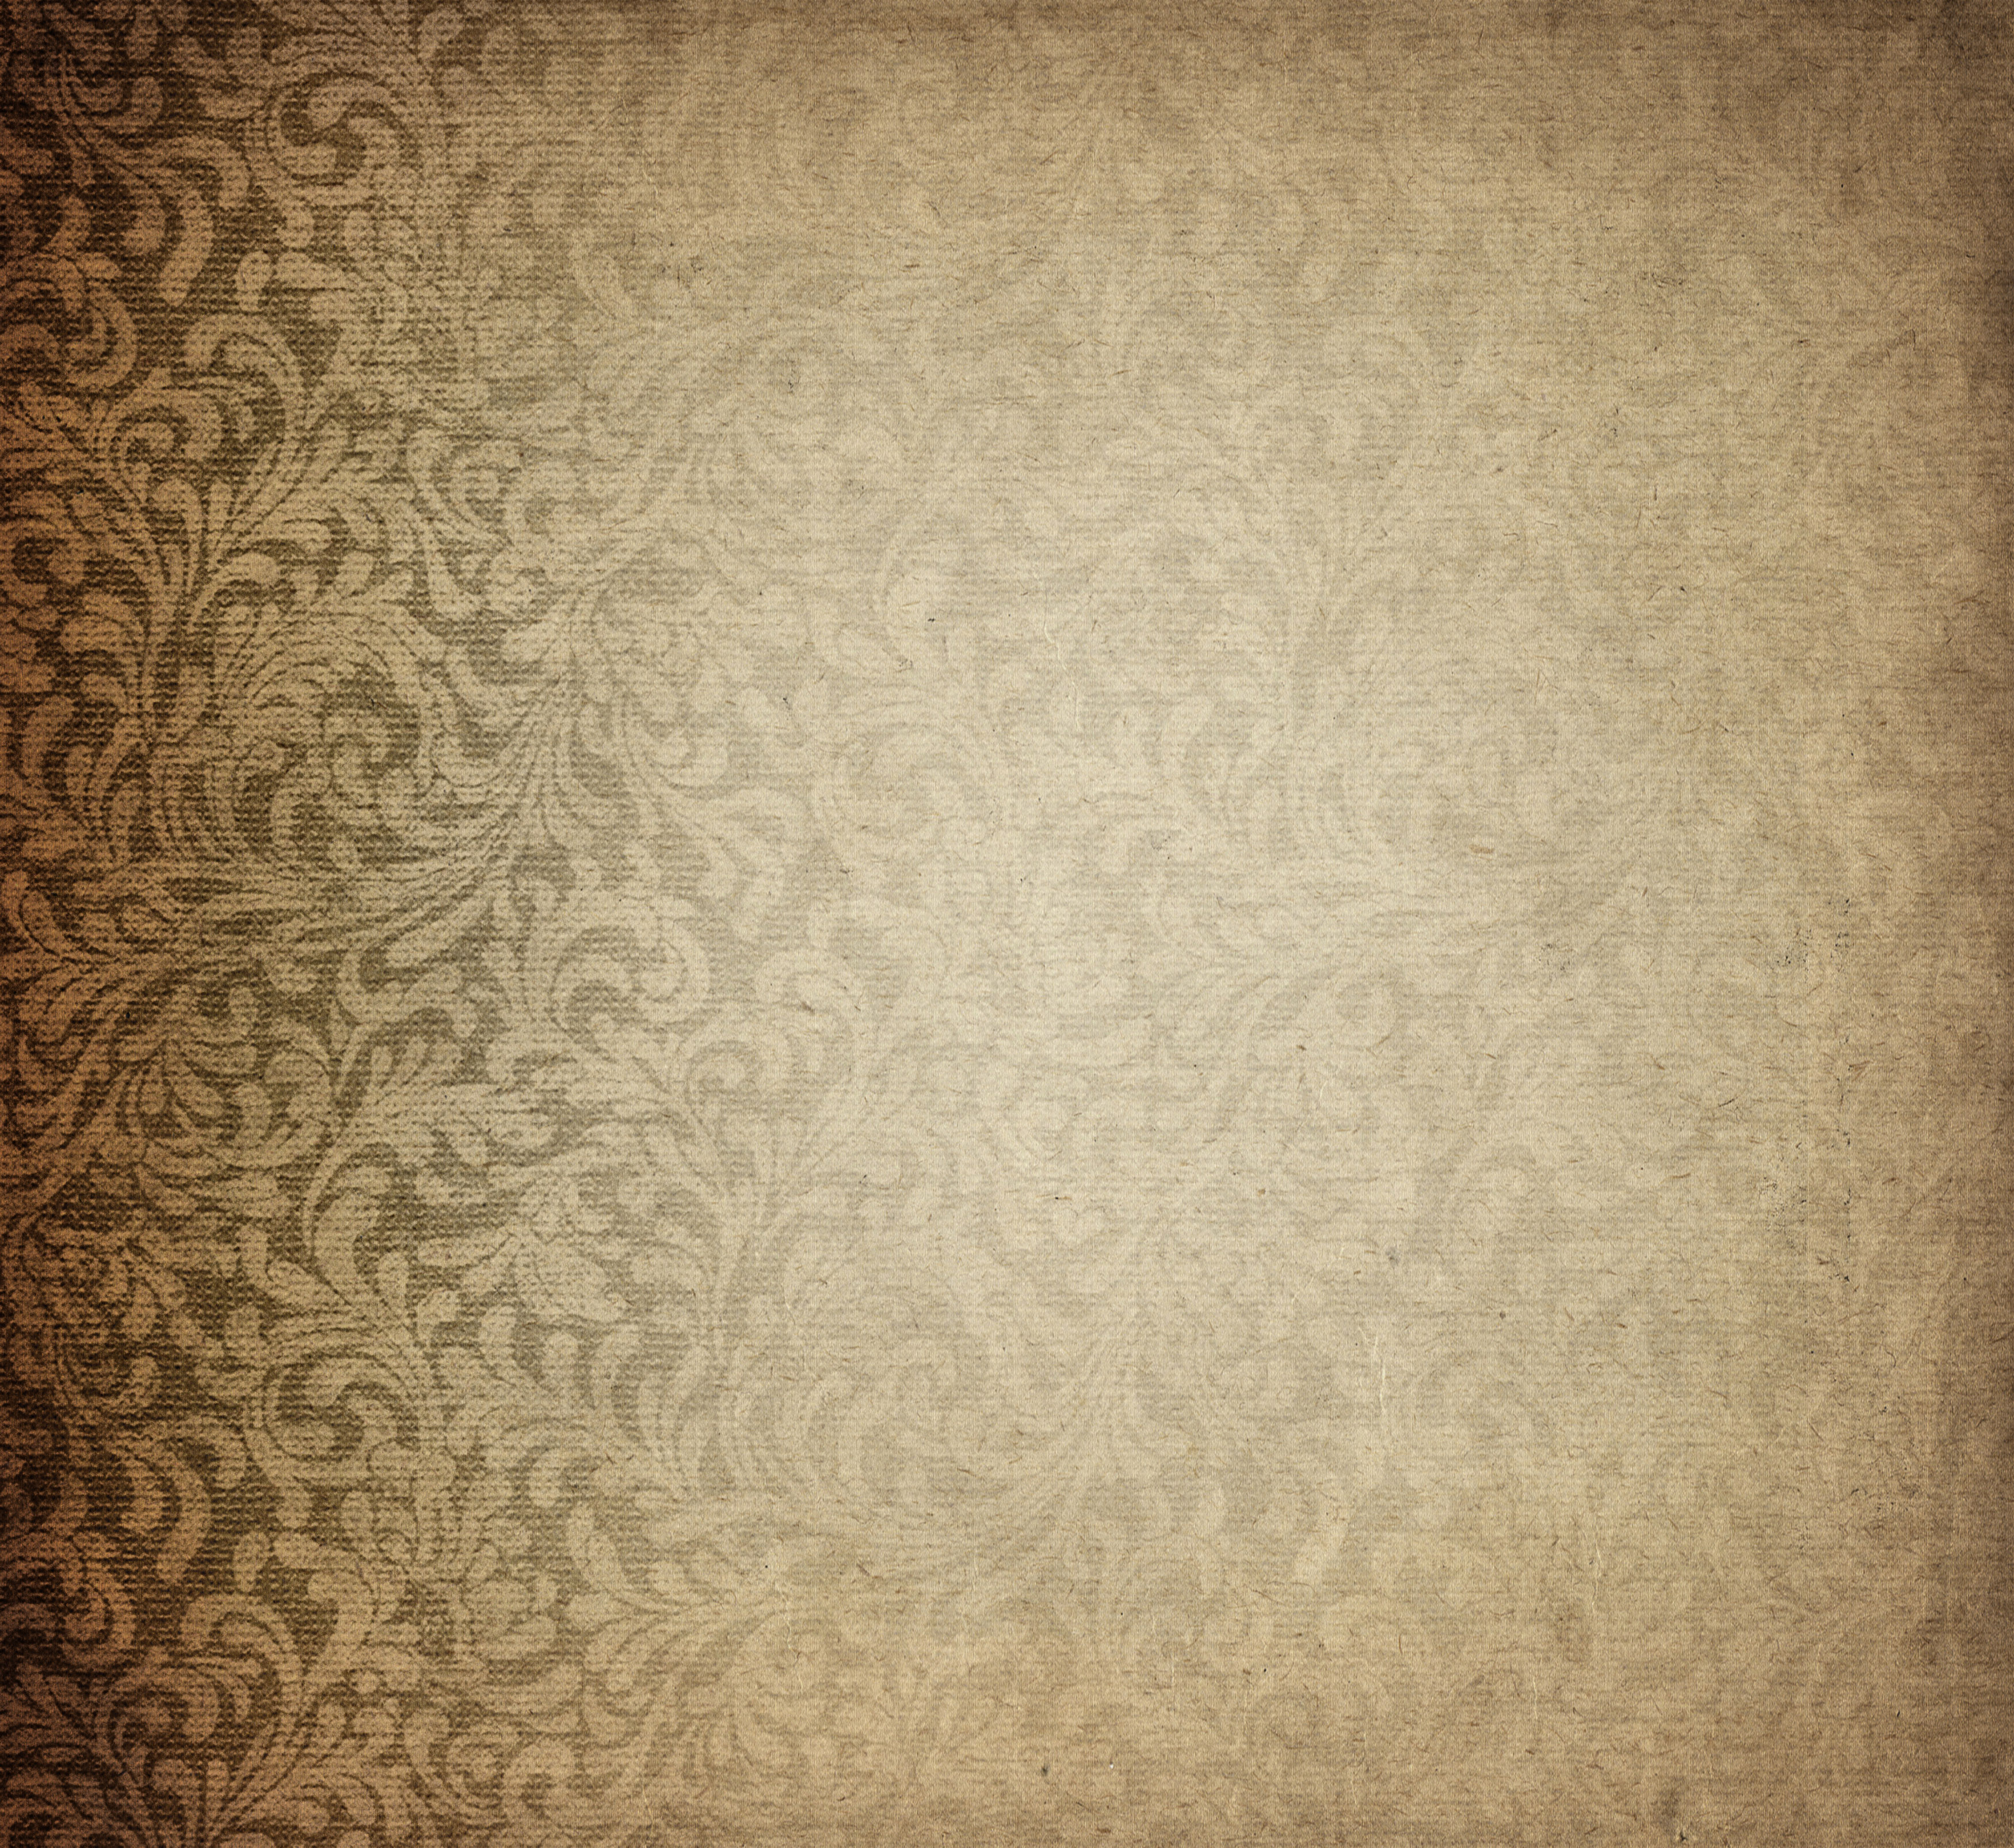 Old Paper Or Wallpaper With Paisley Design Mytextures